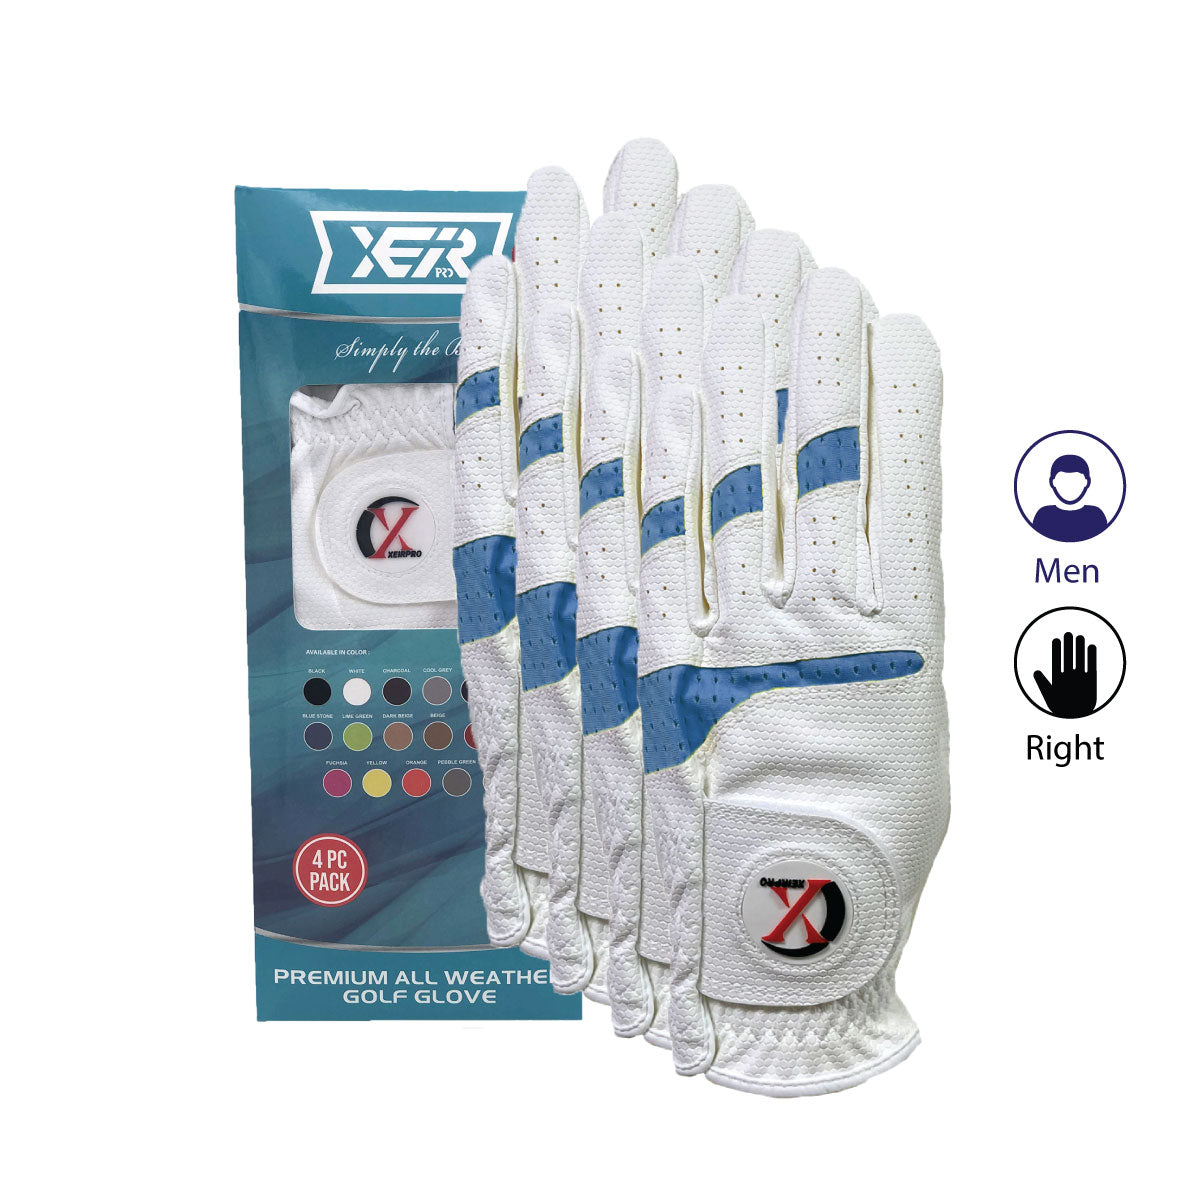 XEIR PRO Premium All Weather Golf Gloves 4 Pack for Men Worn On Right Hand for Left Handed Golfer